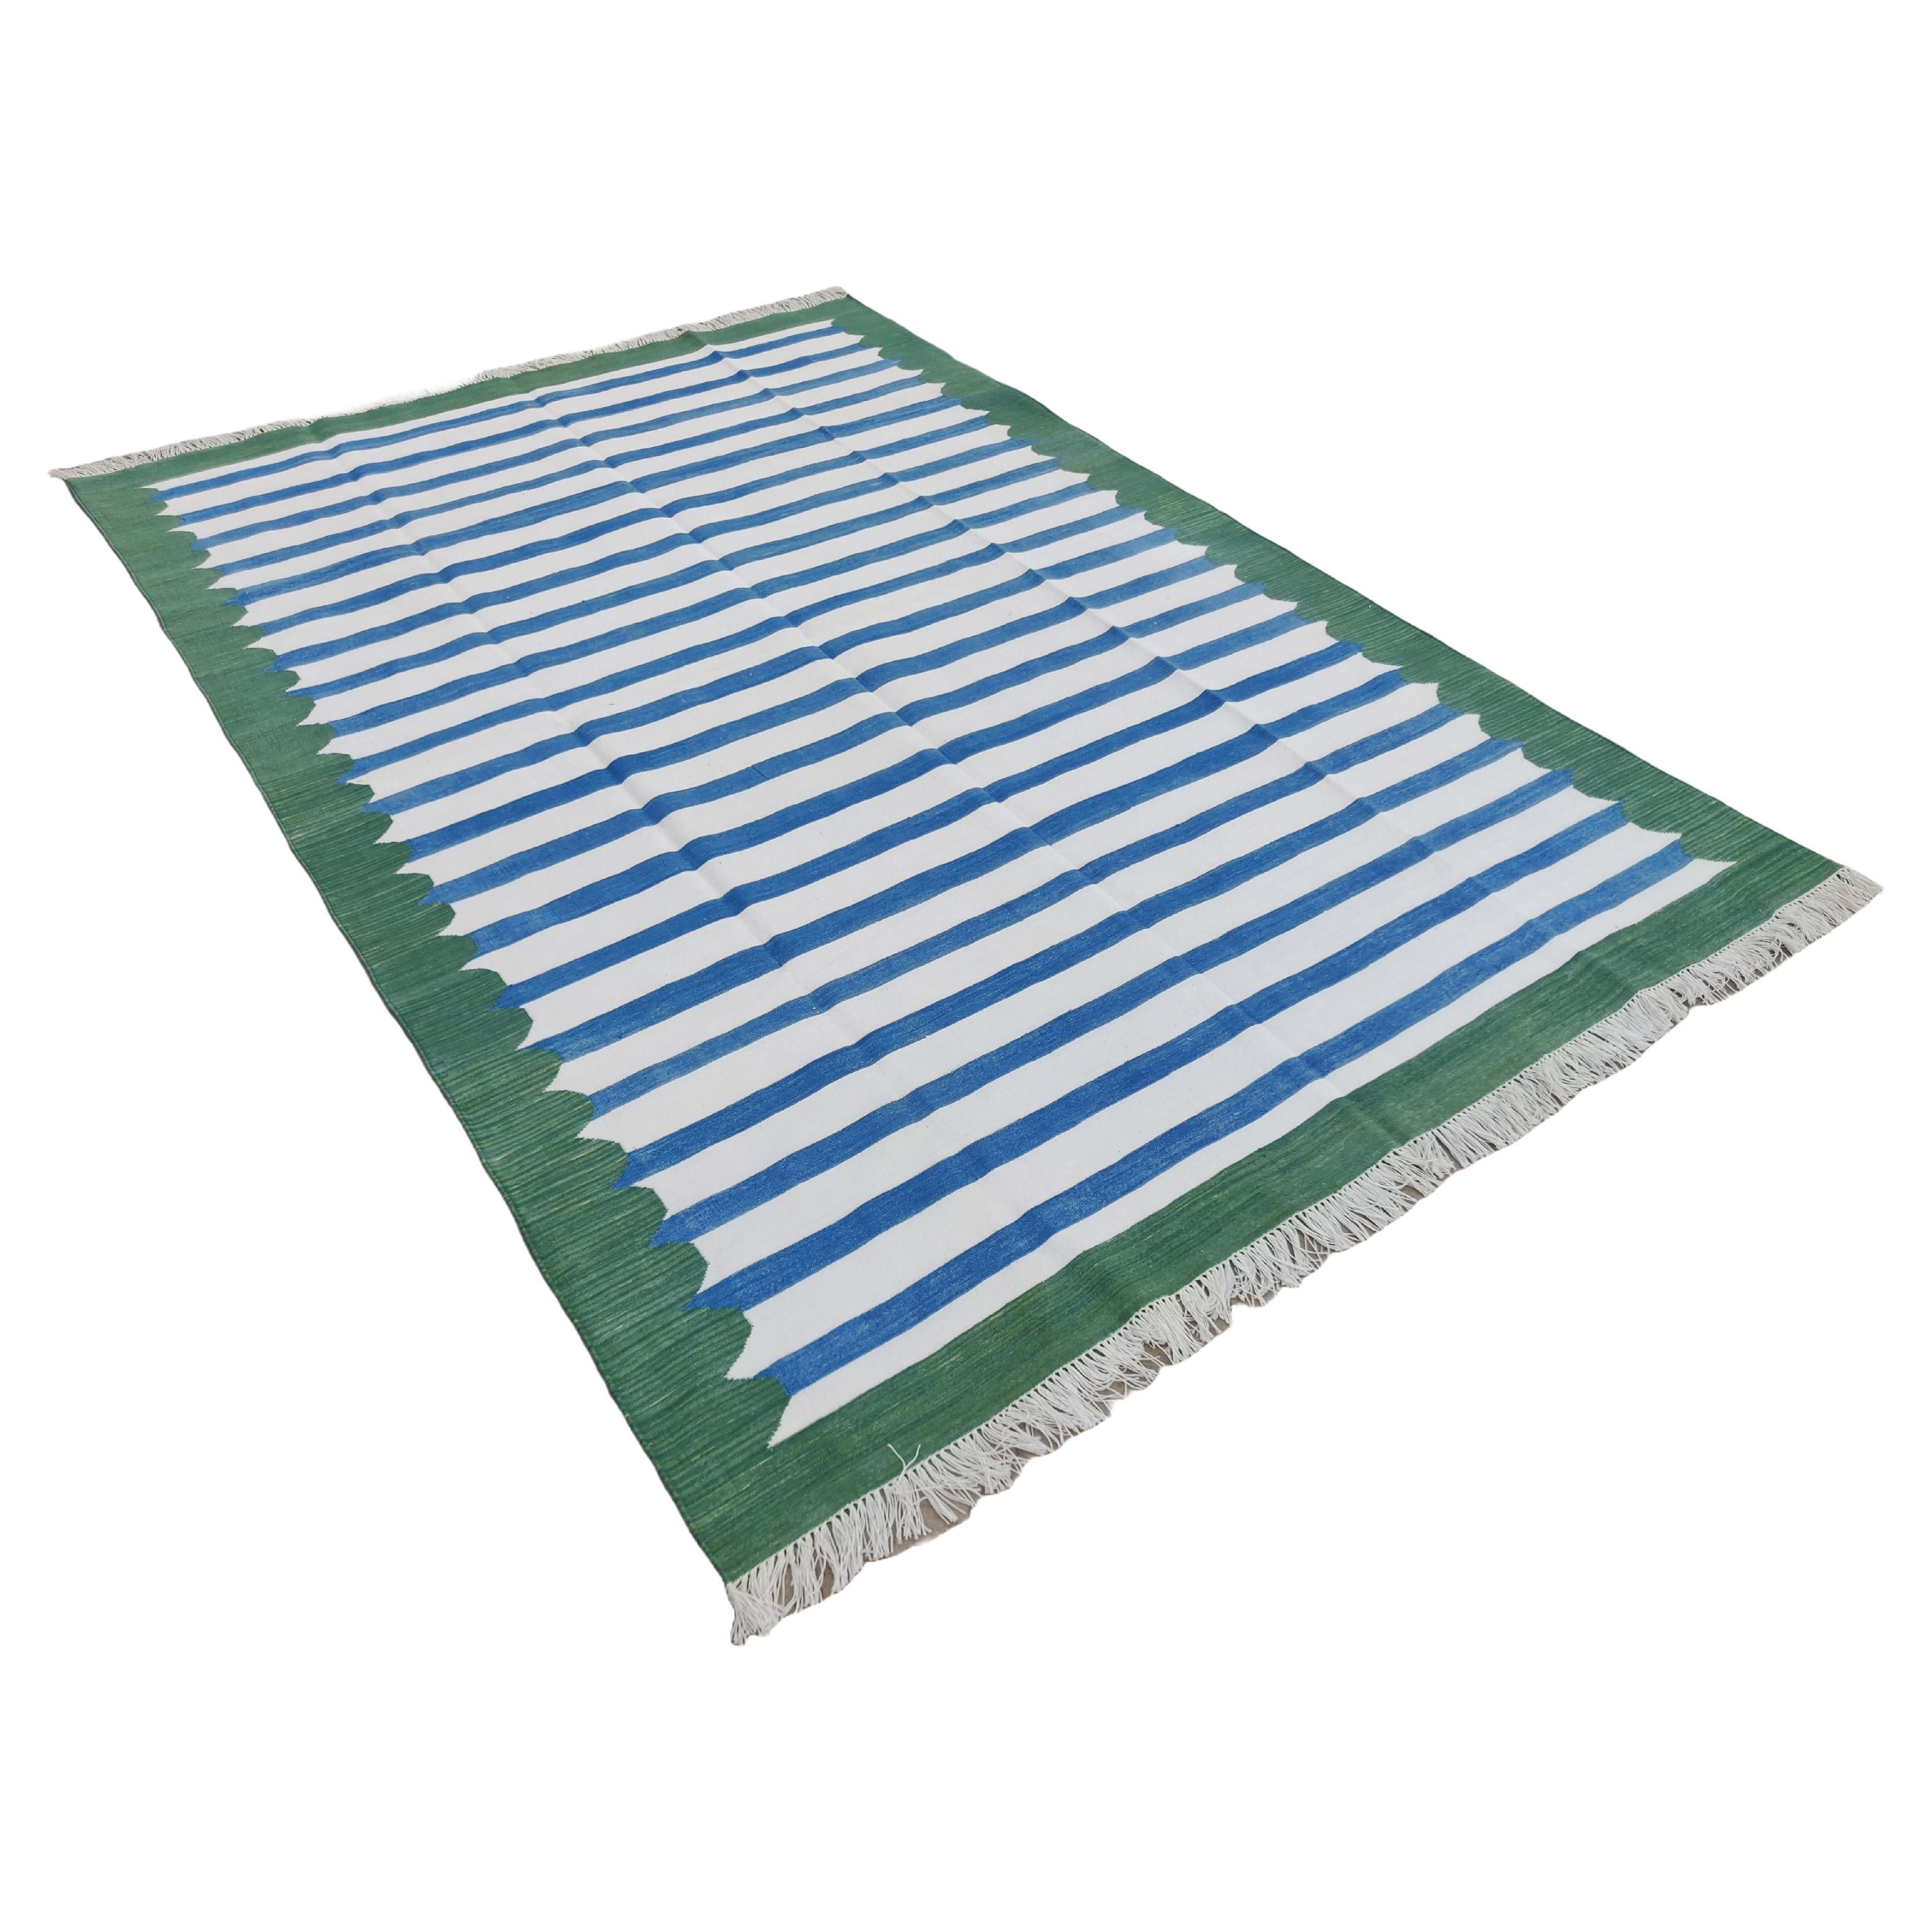 Handmade Cotton Area Flat Weave Rug, 6x9 Blue And Green Striped Indian Dhurrie